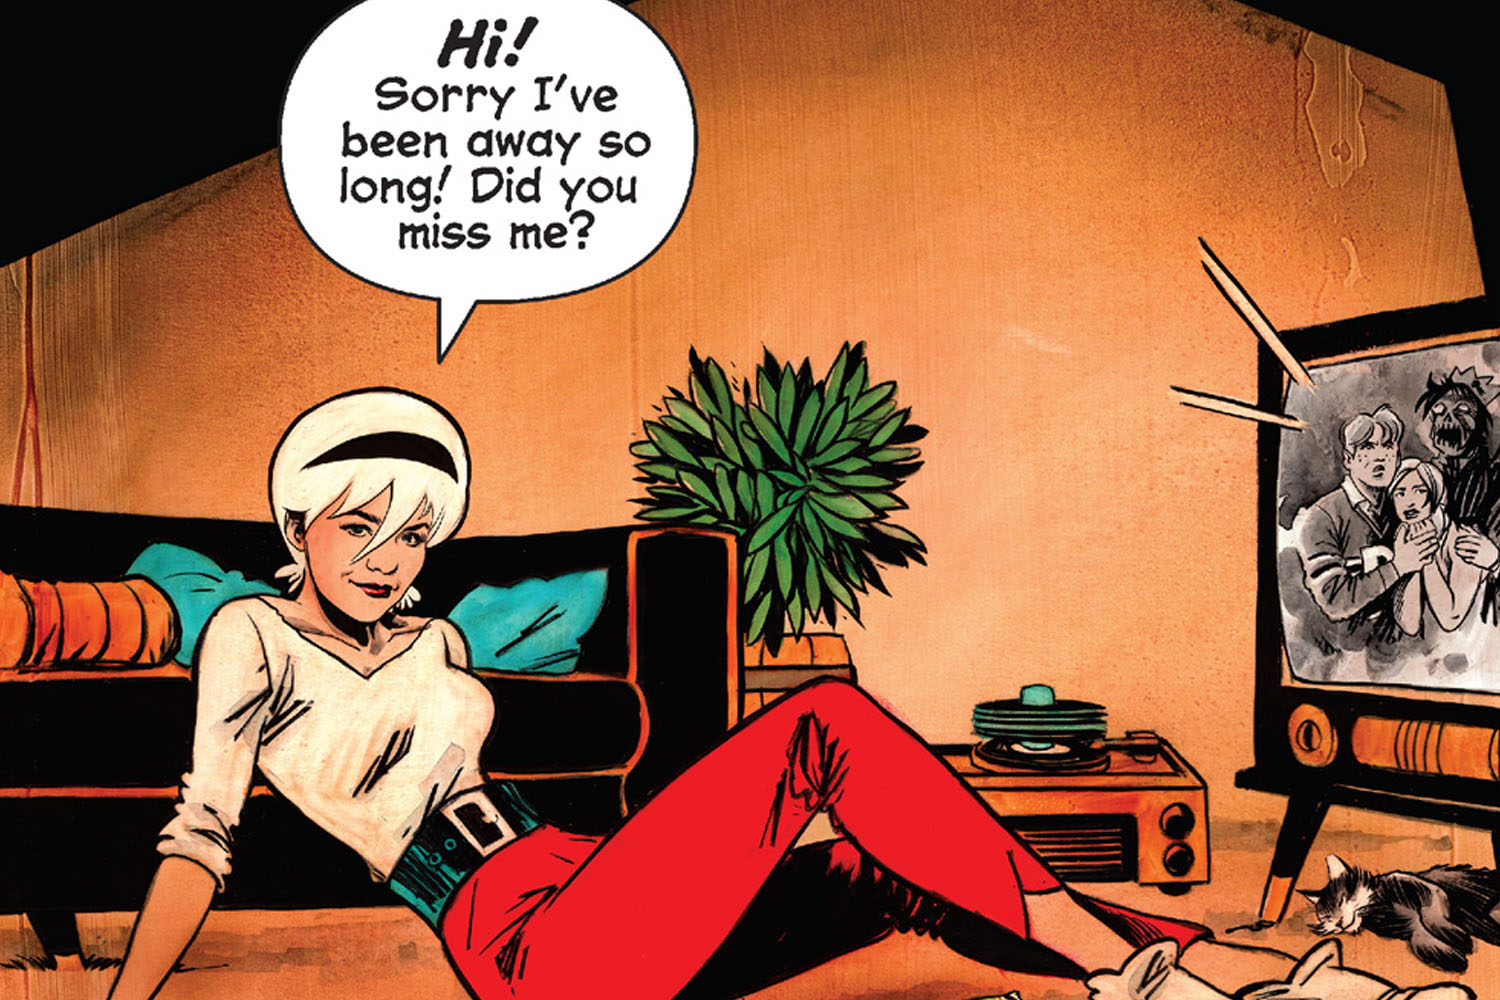 'Chilling Adventures of Sabrina' #9 takes us back to Sacasa's Greendale